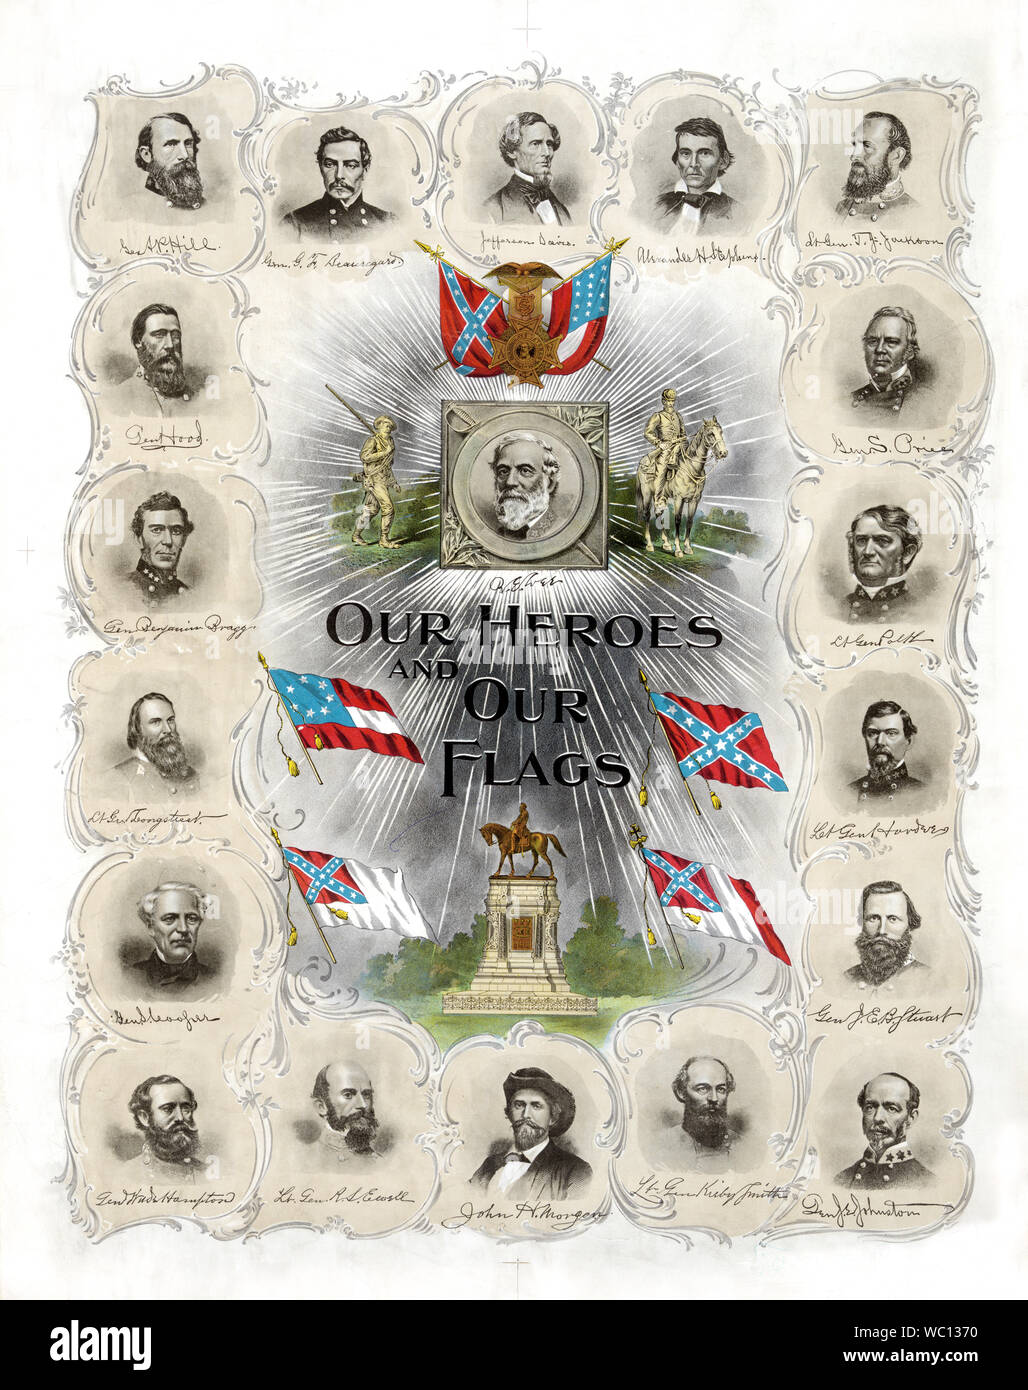 Our Heroes and our Flags, Confederate Memorial Print Published 30 years after the end of the American Civil War, Lithograph by G.H. Buek & Co., 1895 Stock Photo